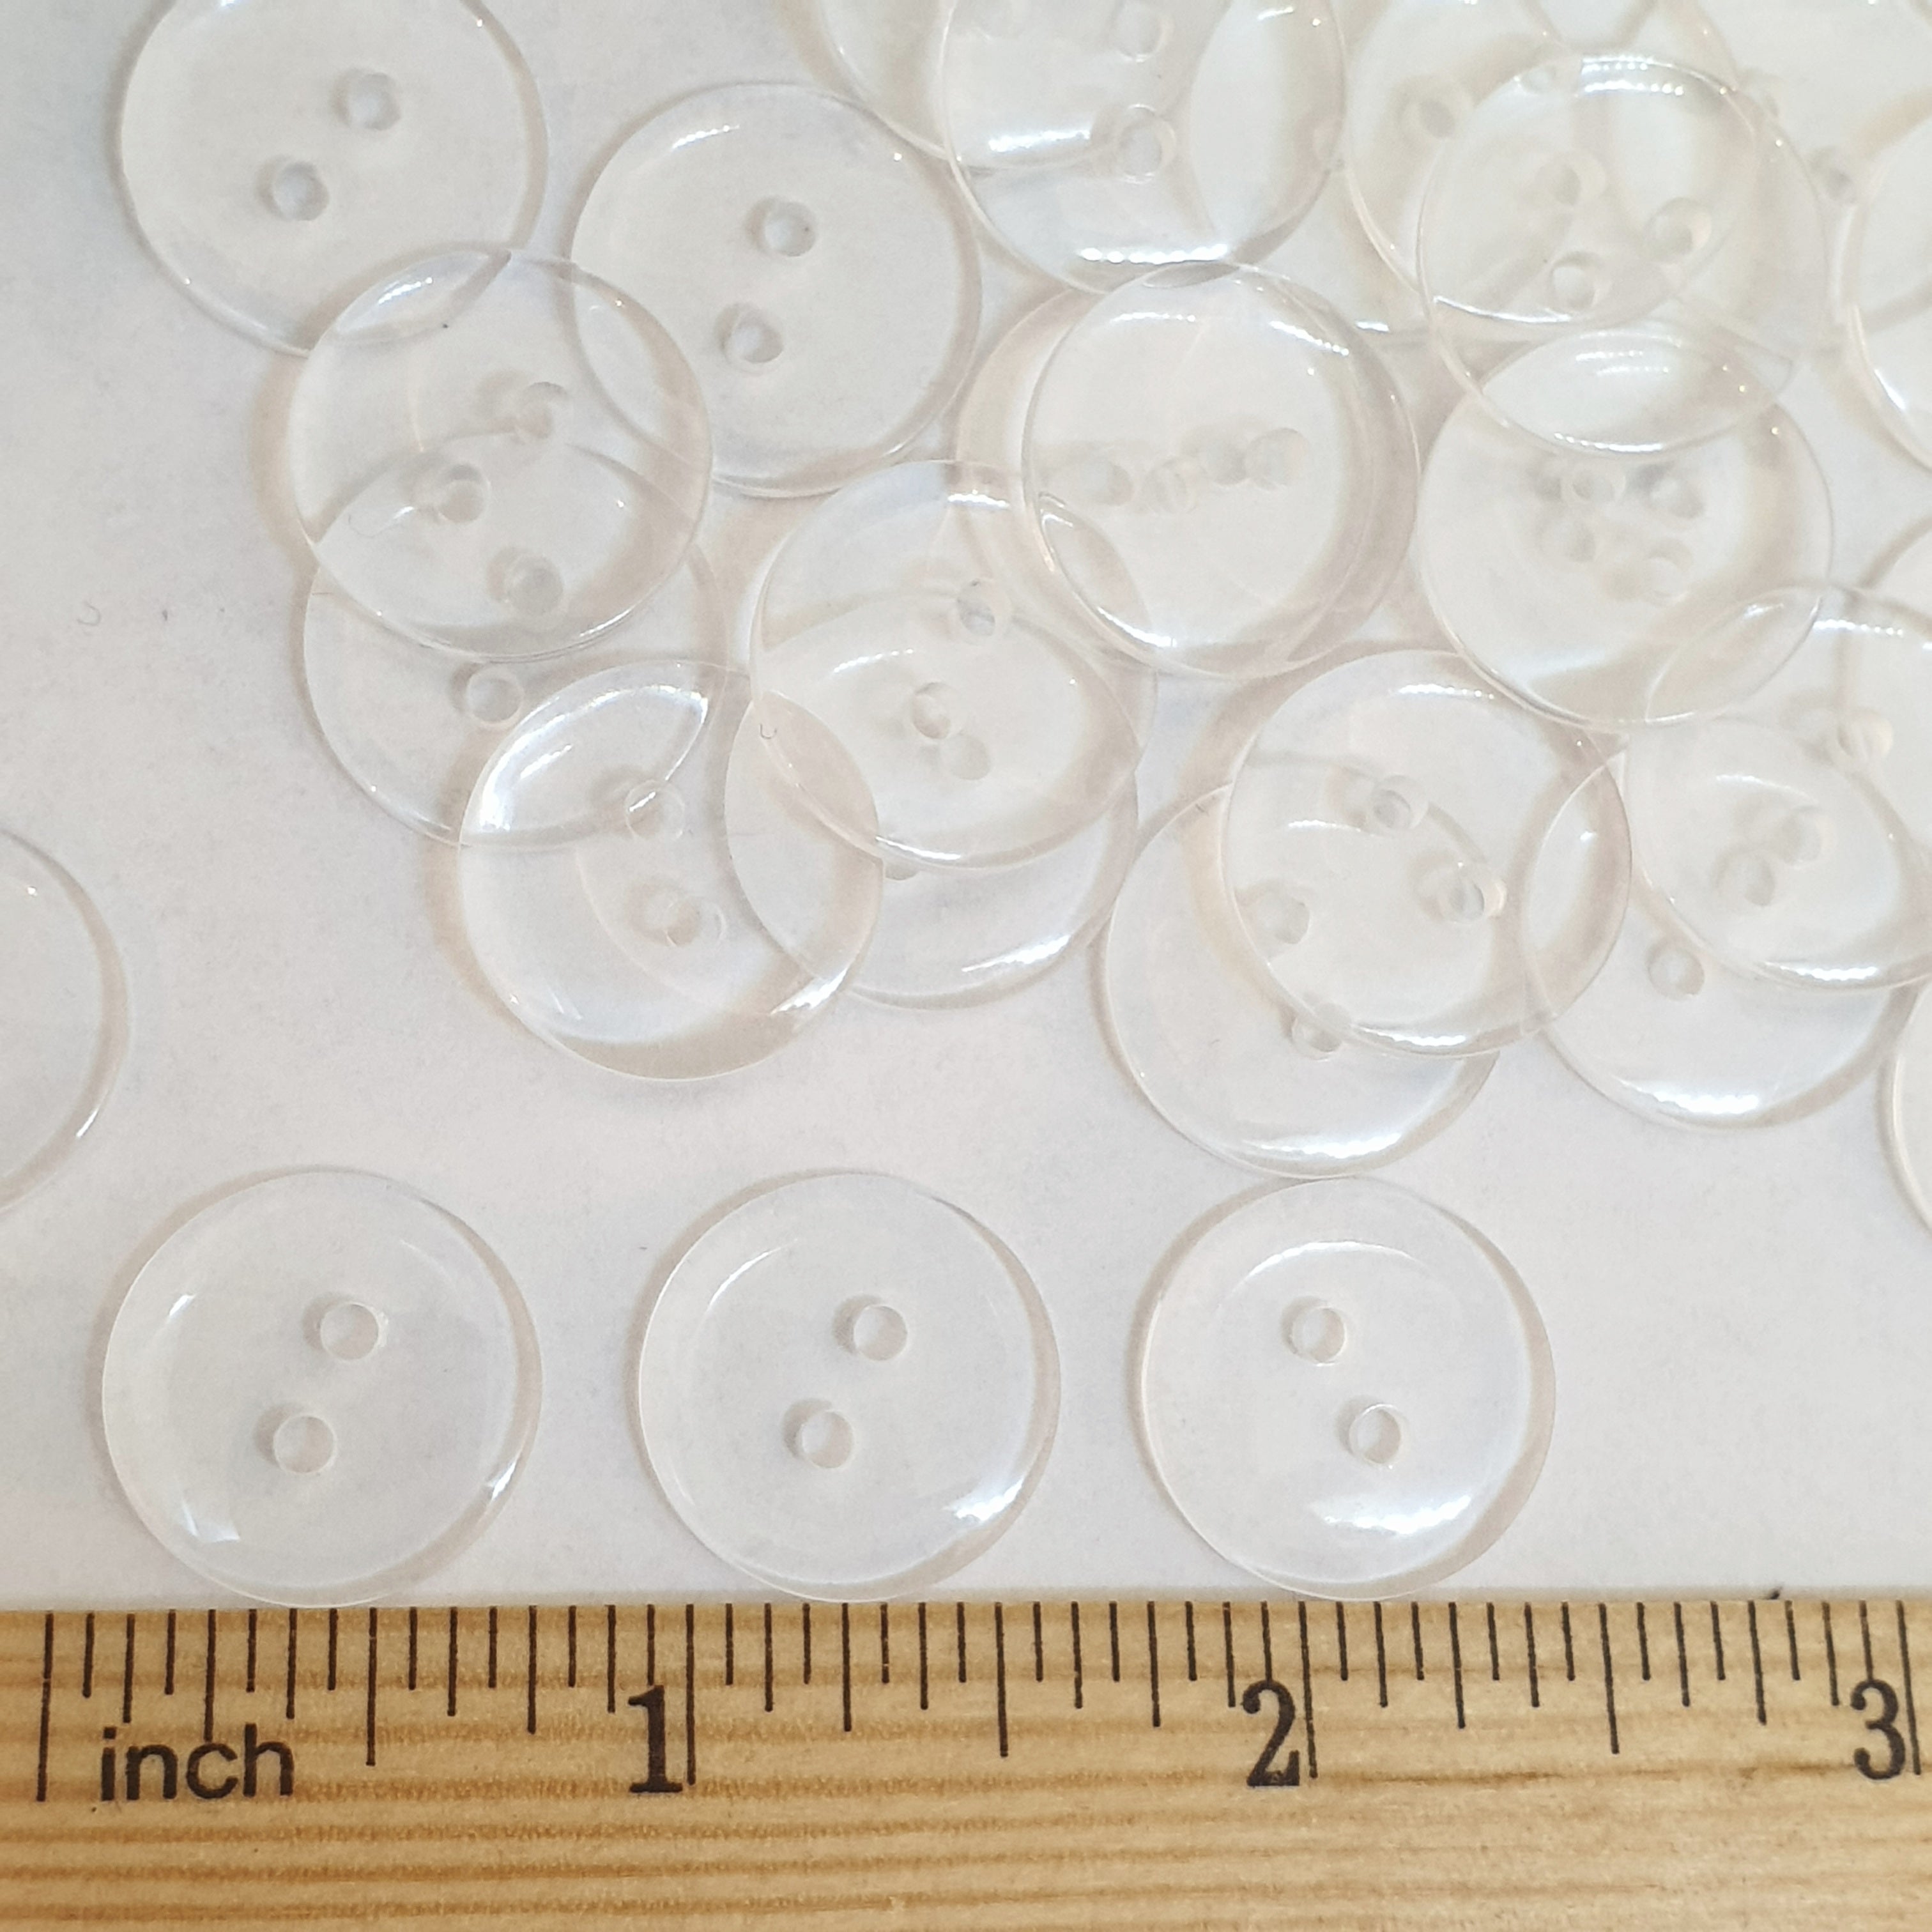 MajorCrafts 50pcs 18mm Transparent Clear 2 Holes Round Resin Sewing Buttons